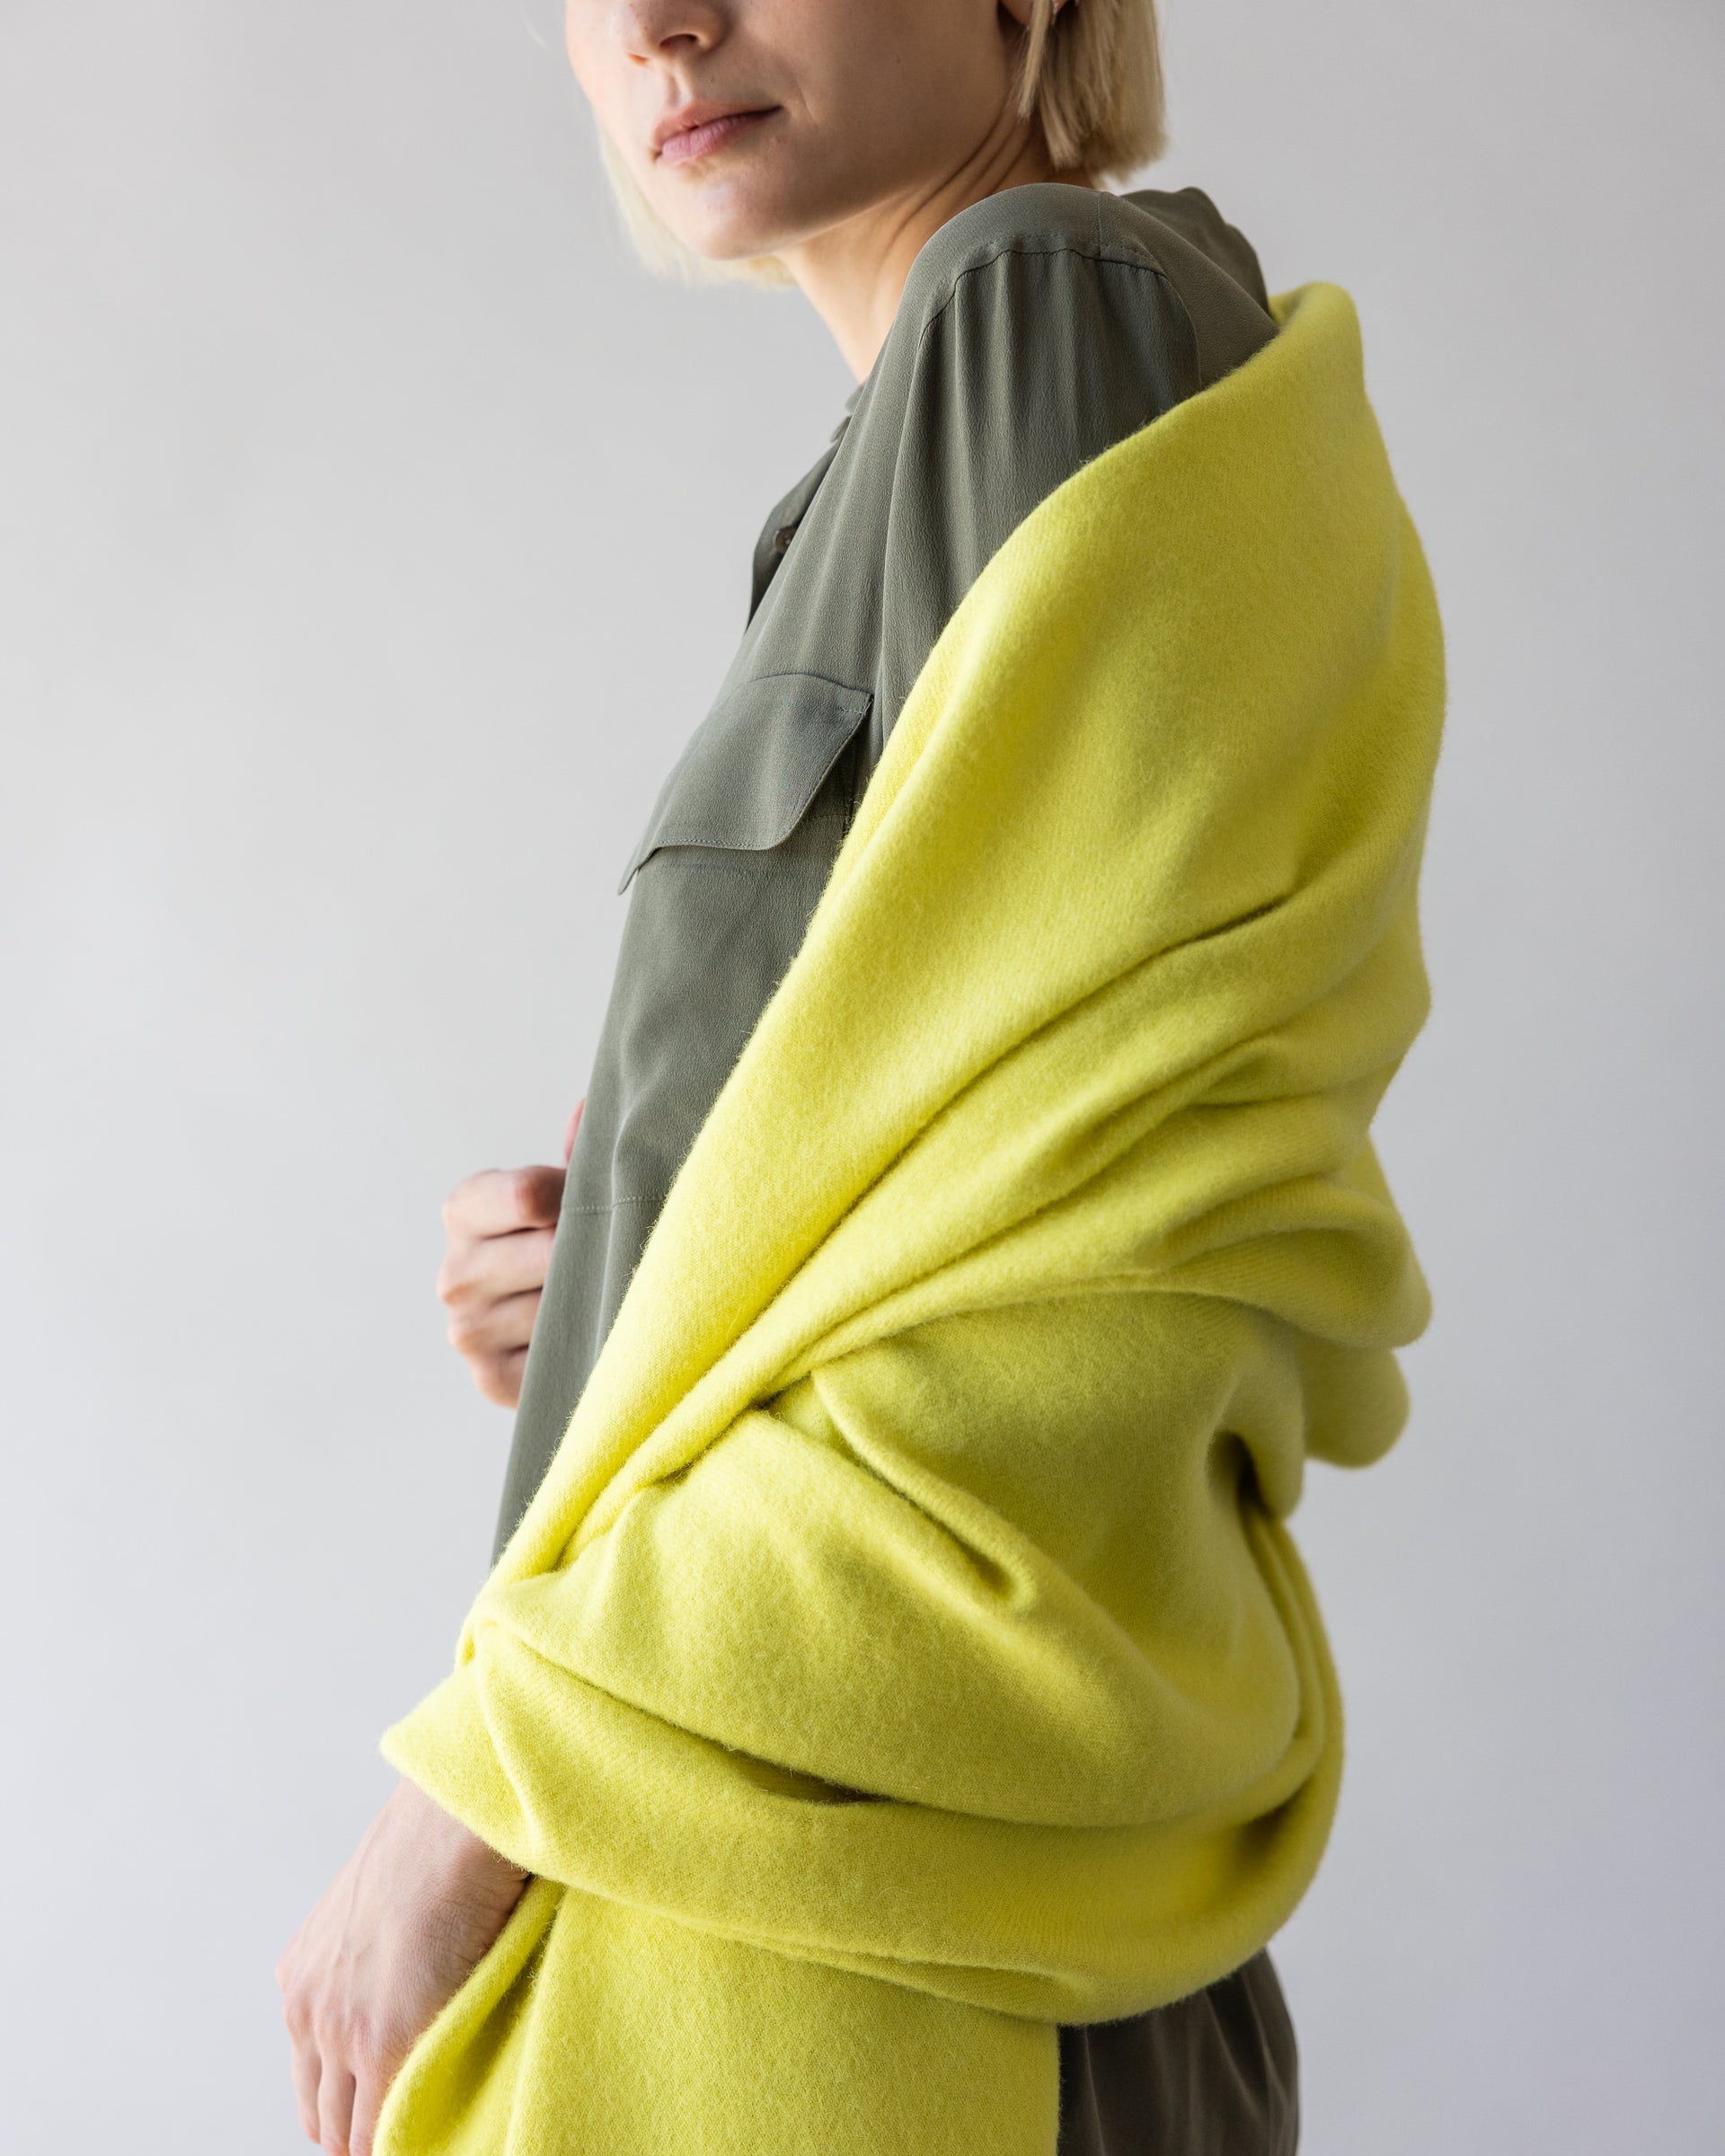 Blonde woman with a citron-colored alpaca throw by Graf Lantz over her right shoulder, side view